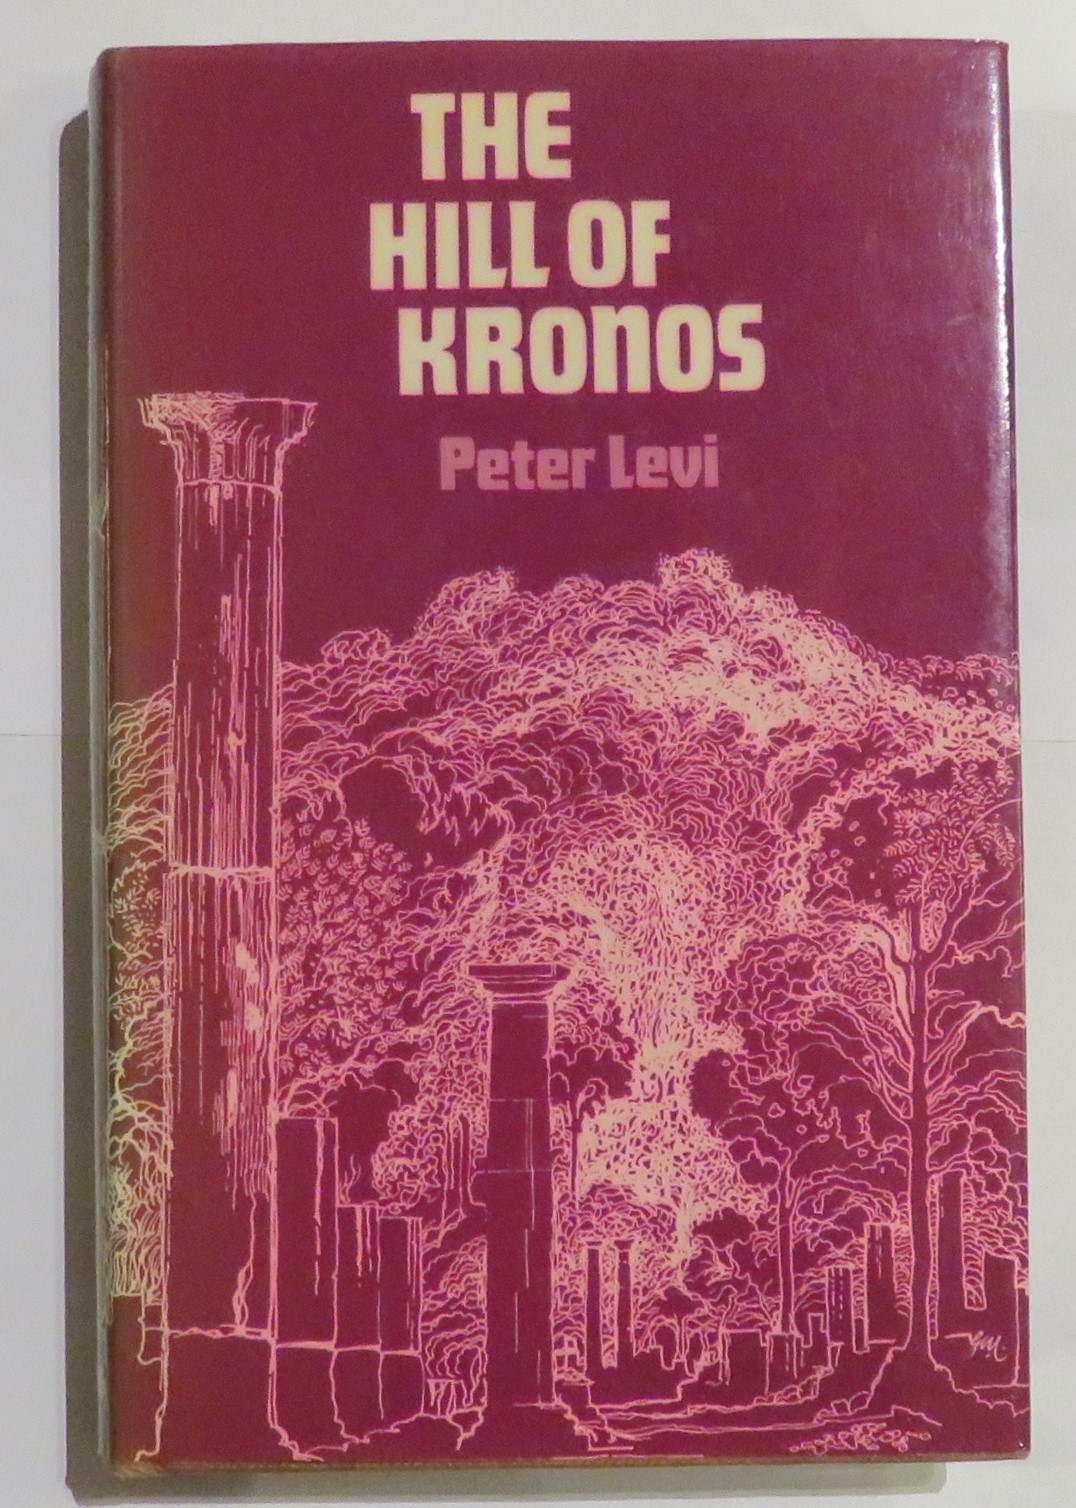 The Hill of Kronos